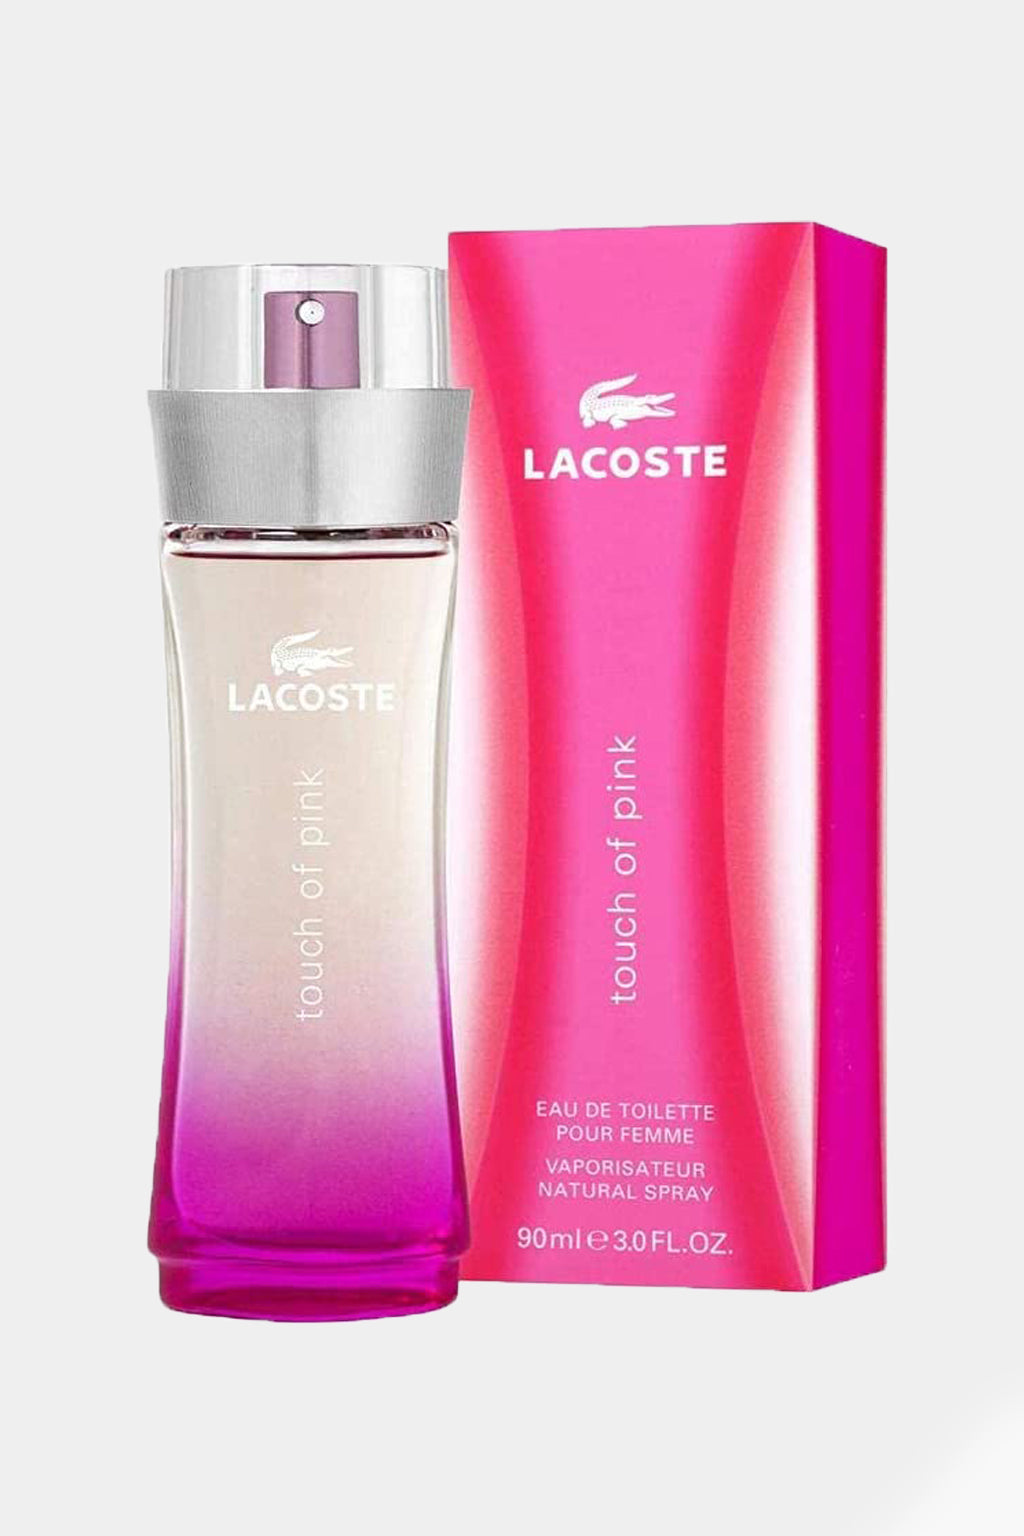 Lacoste - Touch of Pink - EDT spray 90ml (Women)